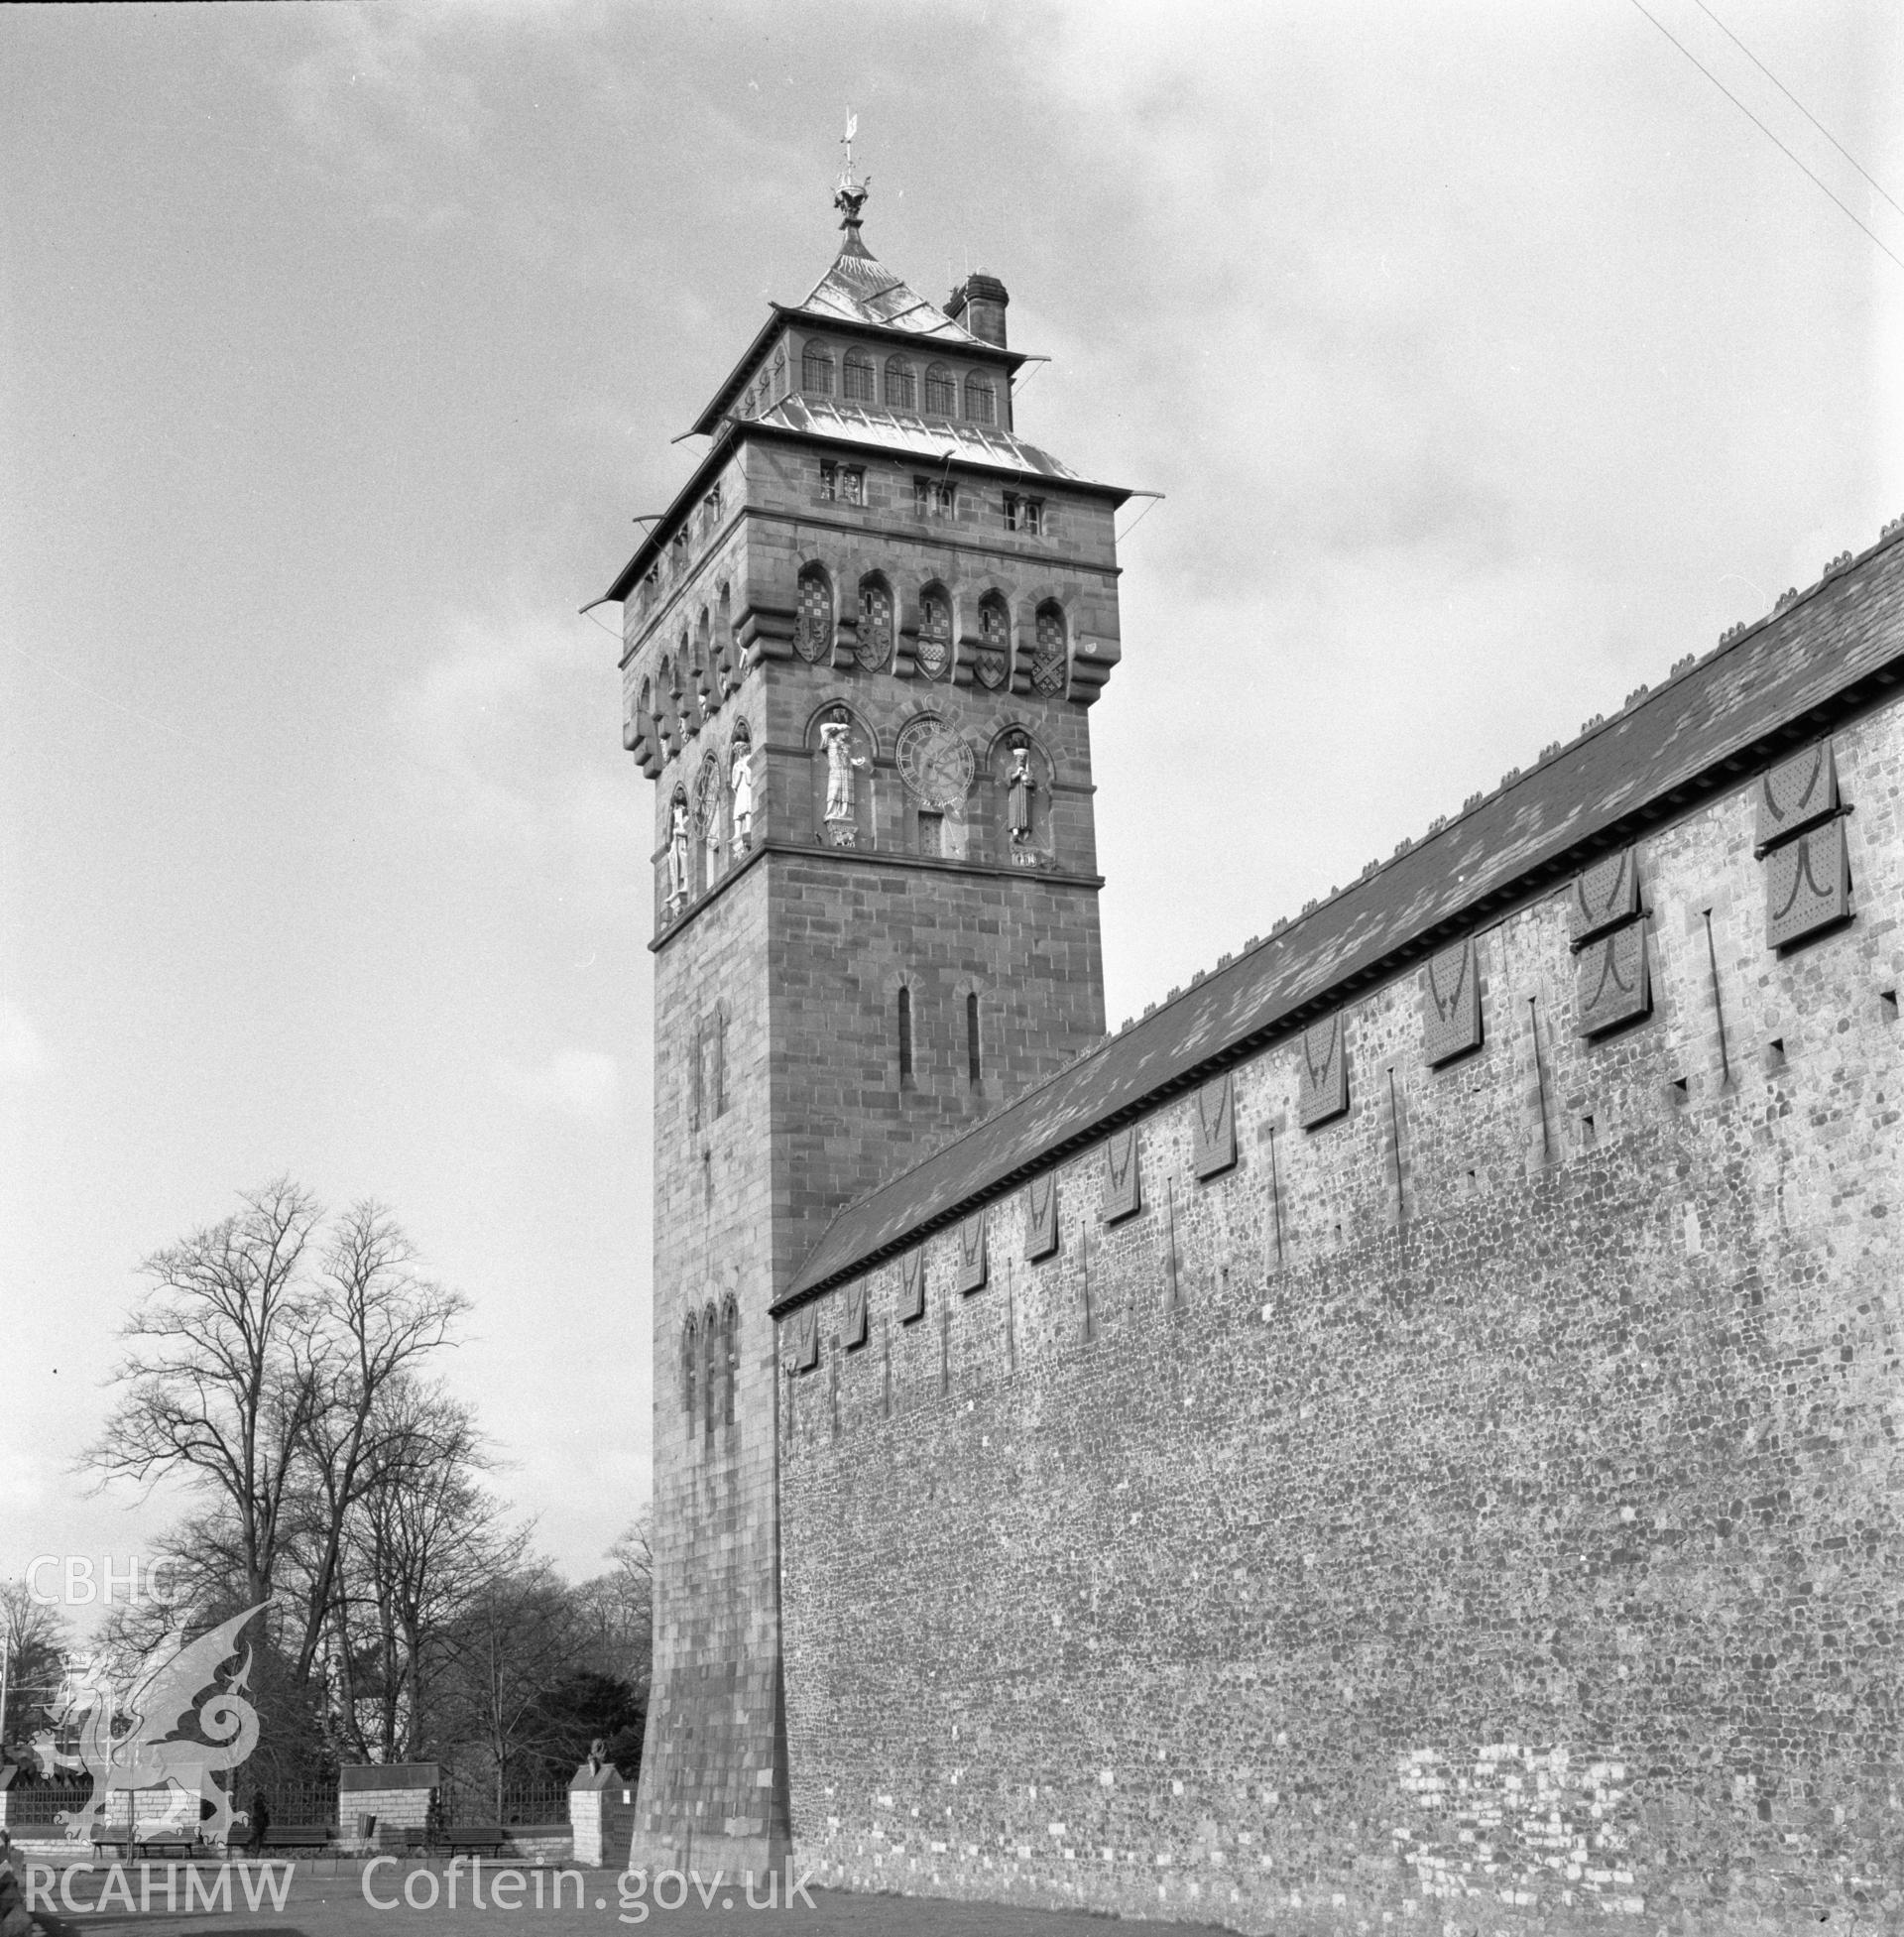 Digital copy of a black and white photograph showing Bute Tower at Cardiff Castle, taken 21st February 1966.